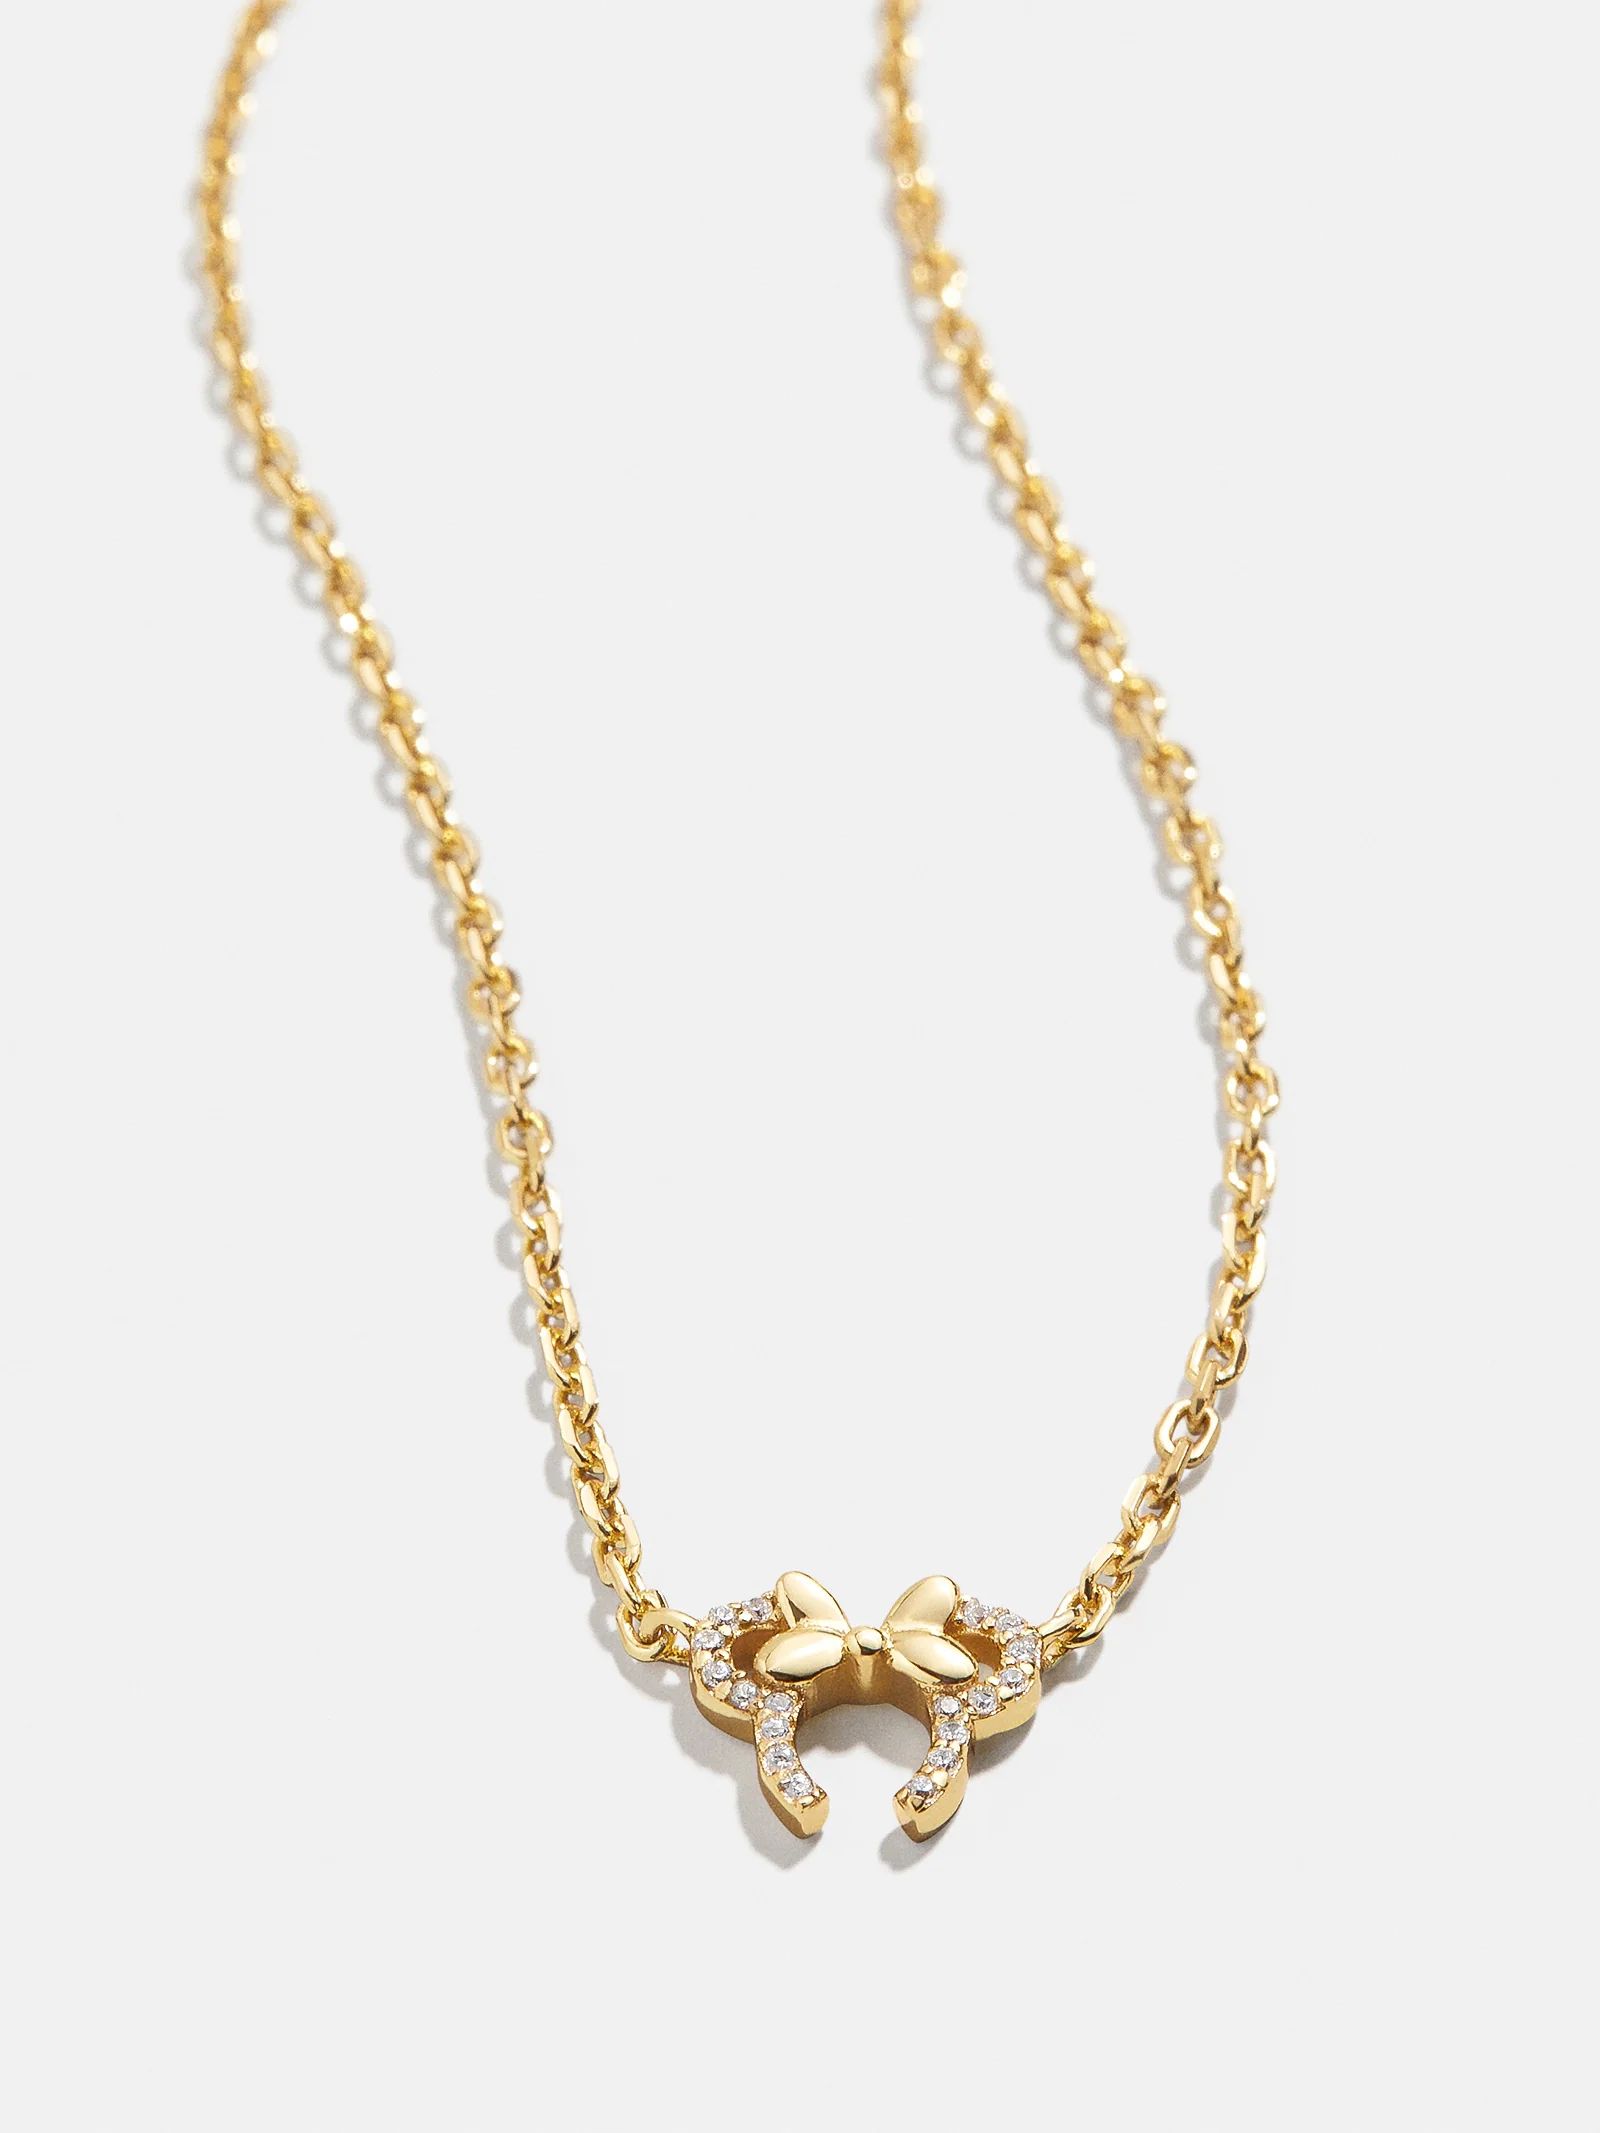 Minnie Mouse Disney Headband 18K Gold Plated Sterling Silver Necklace - Gold | BaubleBar (US)